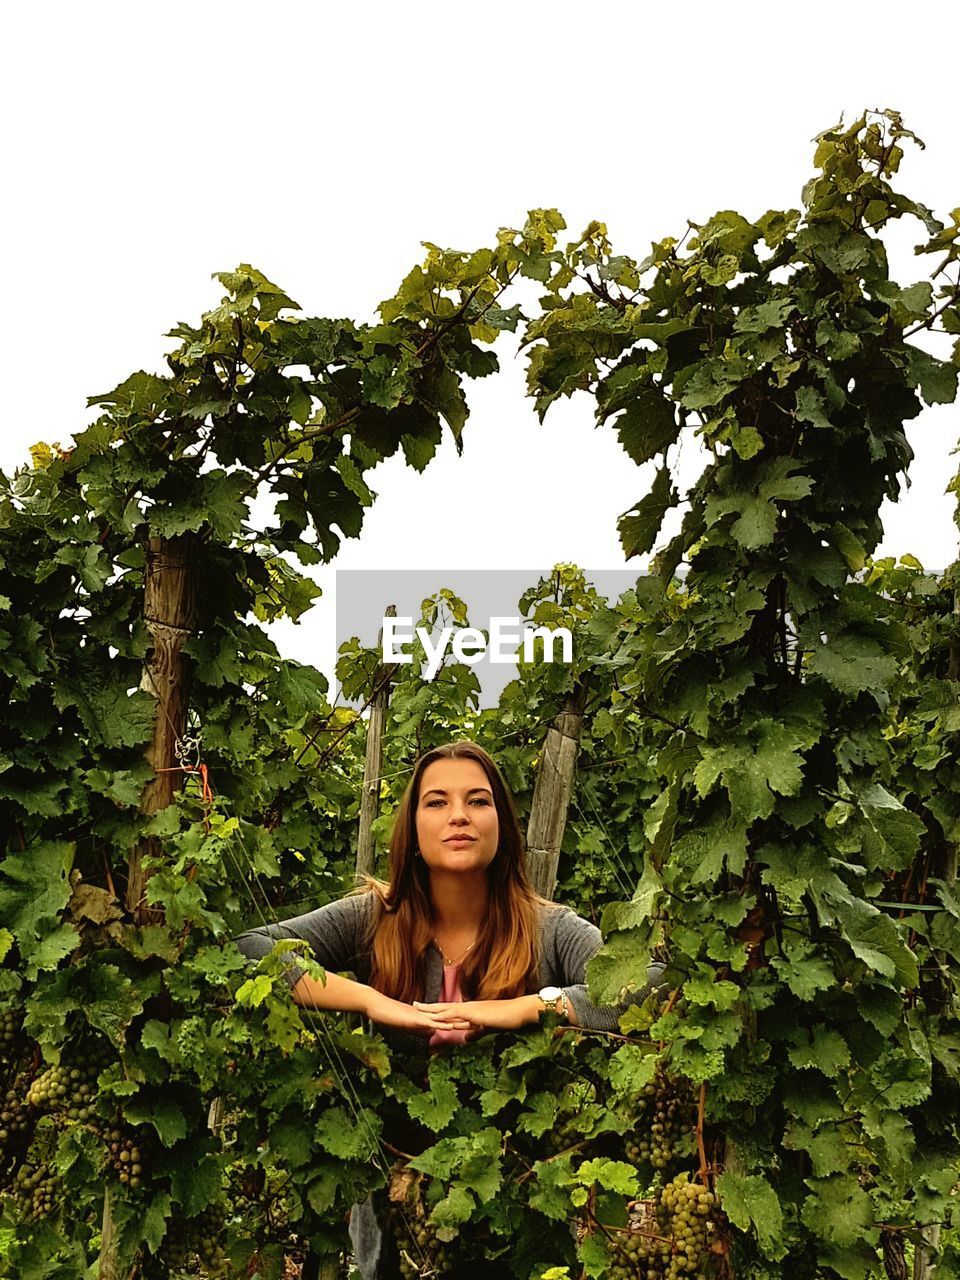 Portrait of young woman standing amidst plants in vineyard